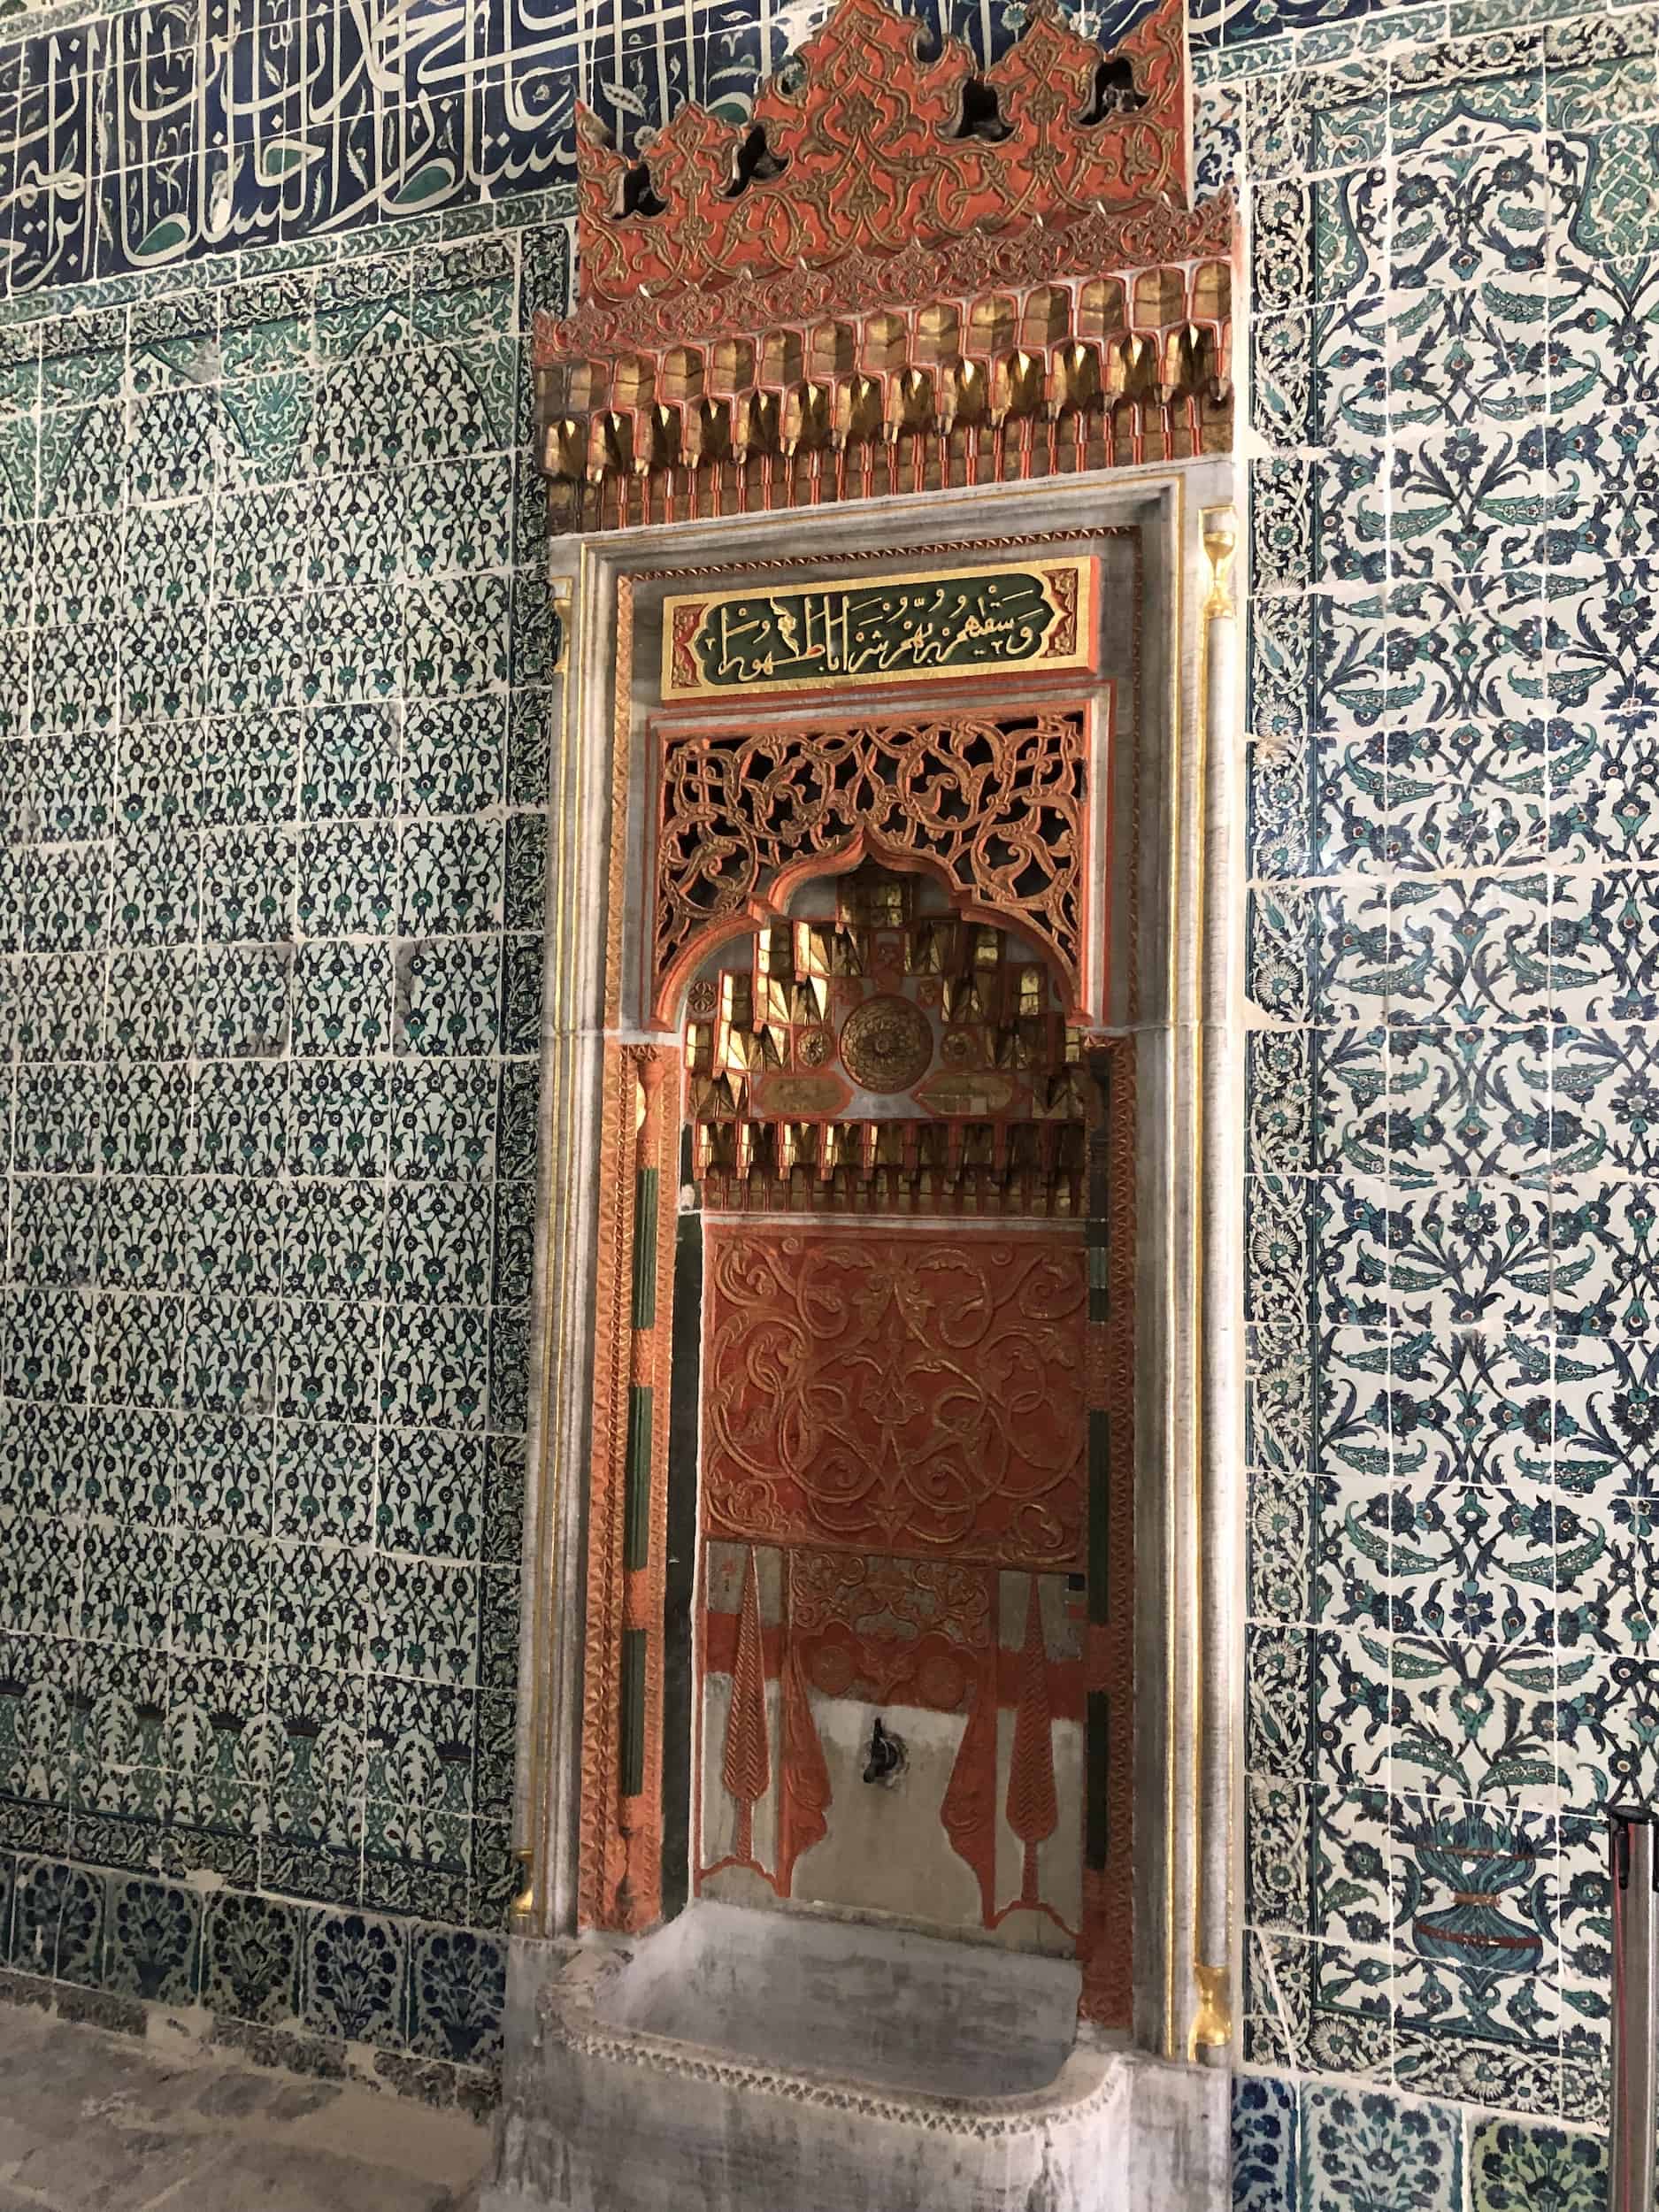 Fountain in the Hall with the Fireplace in the Imperial Harem at Topkapi Palace in Istanbul, Turkey